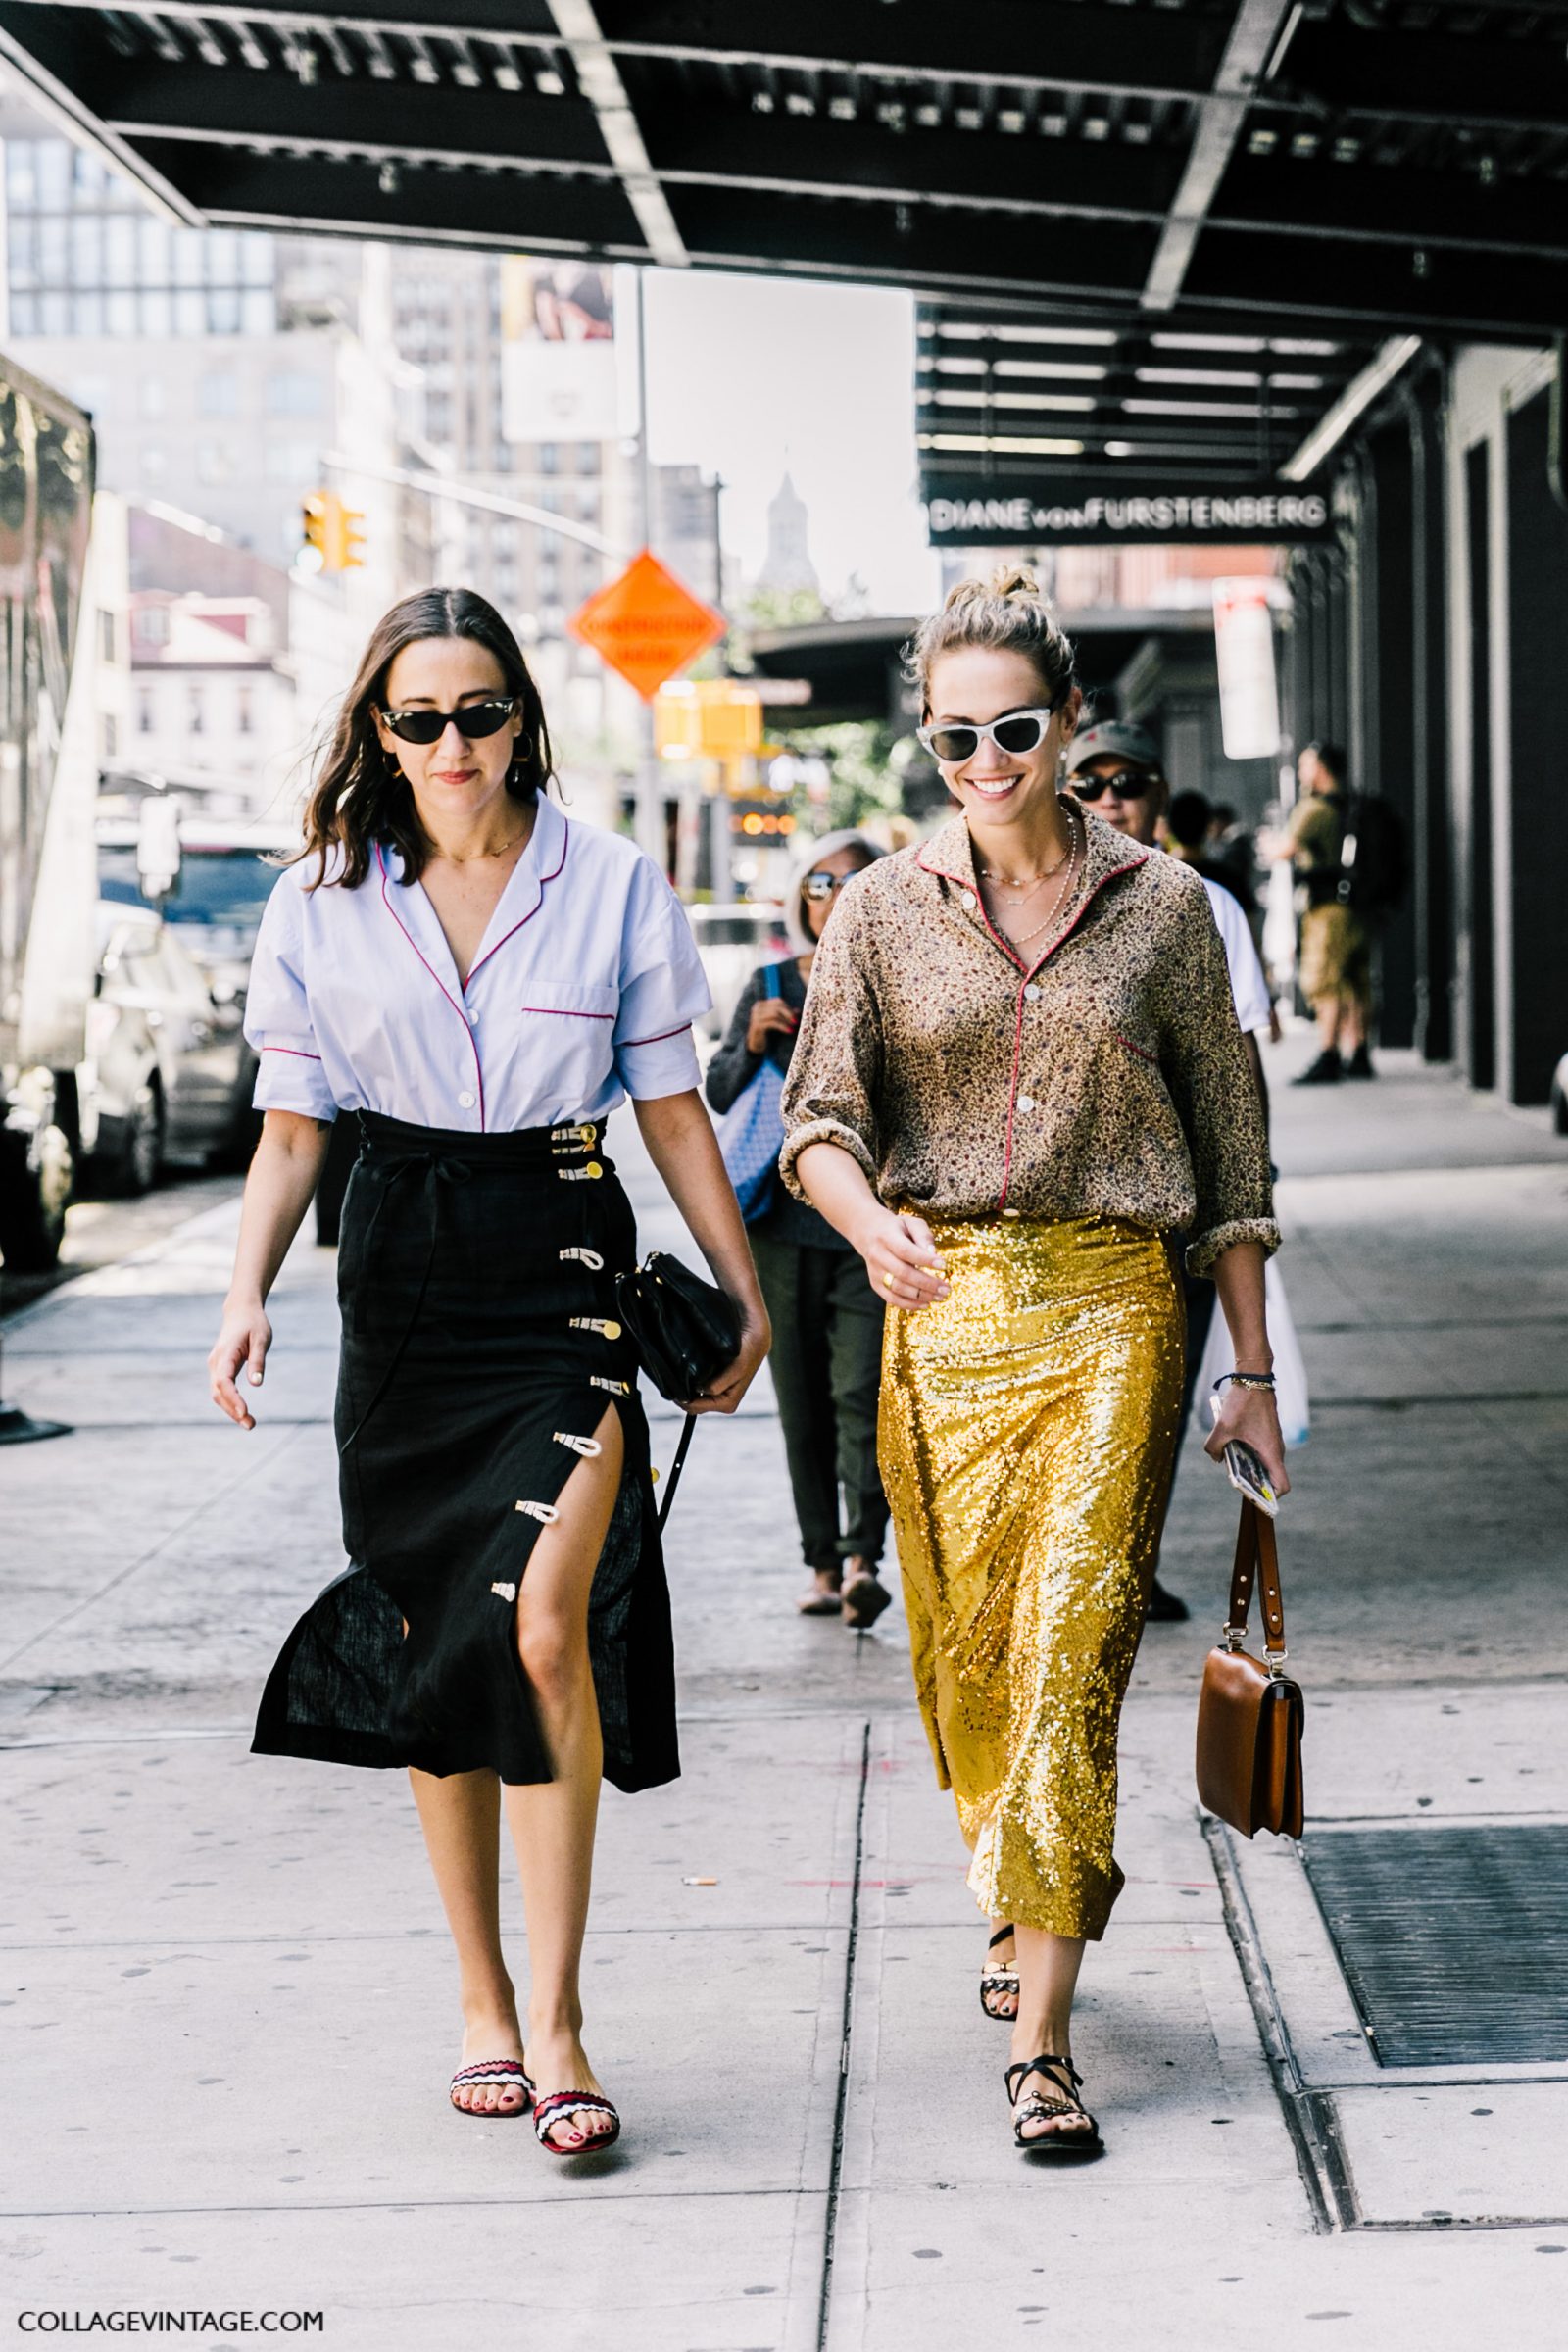 nyfw-new_york_fashion_week_ss17-street_style-outfits-collage_vintage-vintage-phillip_lim-the-row-proenza_schouler-rossie_aussolin-62